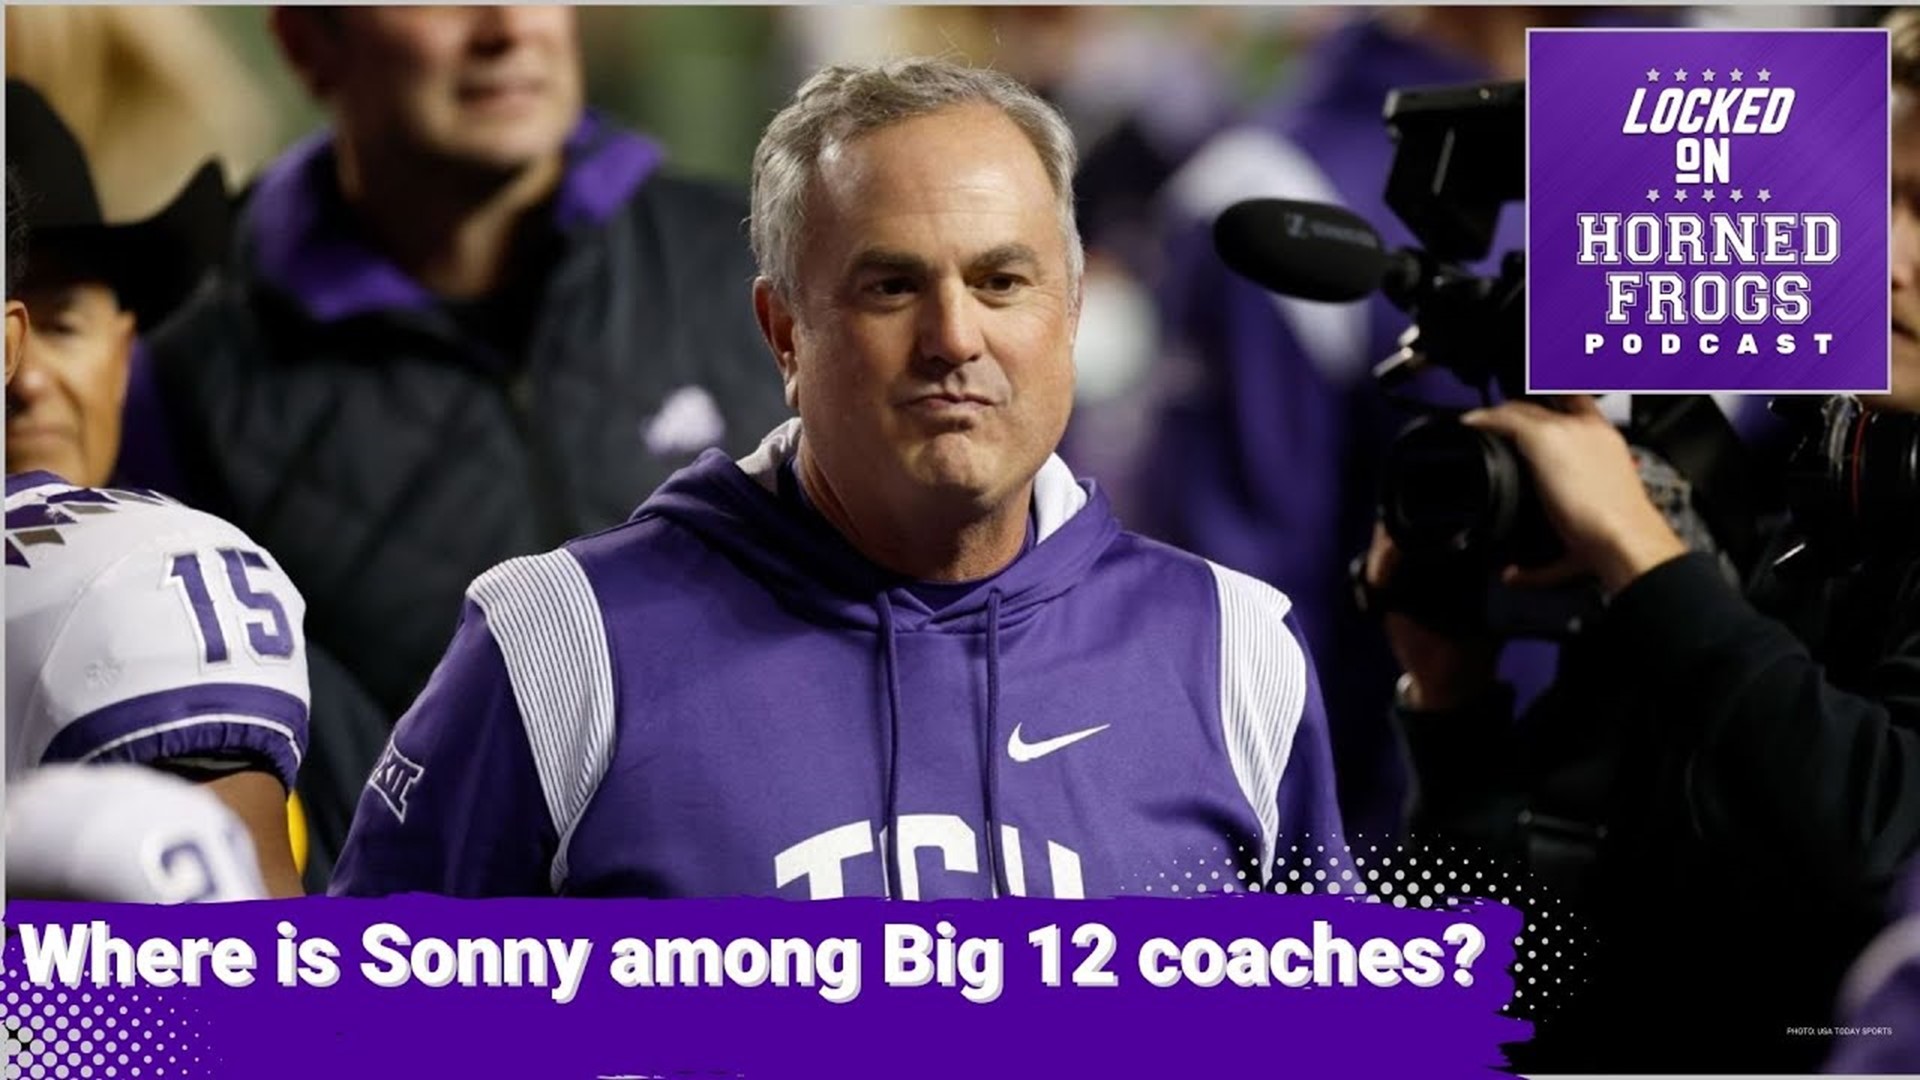 On3 came out with their Big 12 coaching rankings. Where does Sonny Dykes fall on the list?